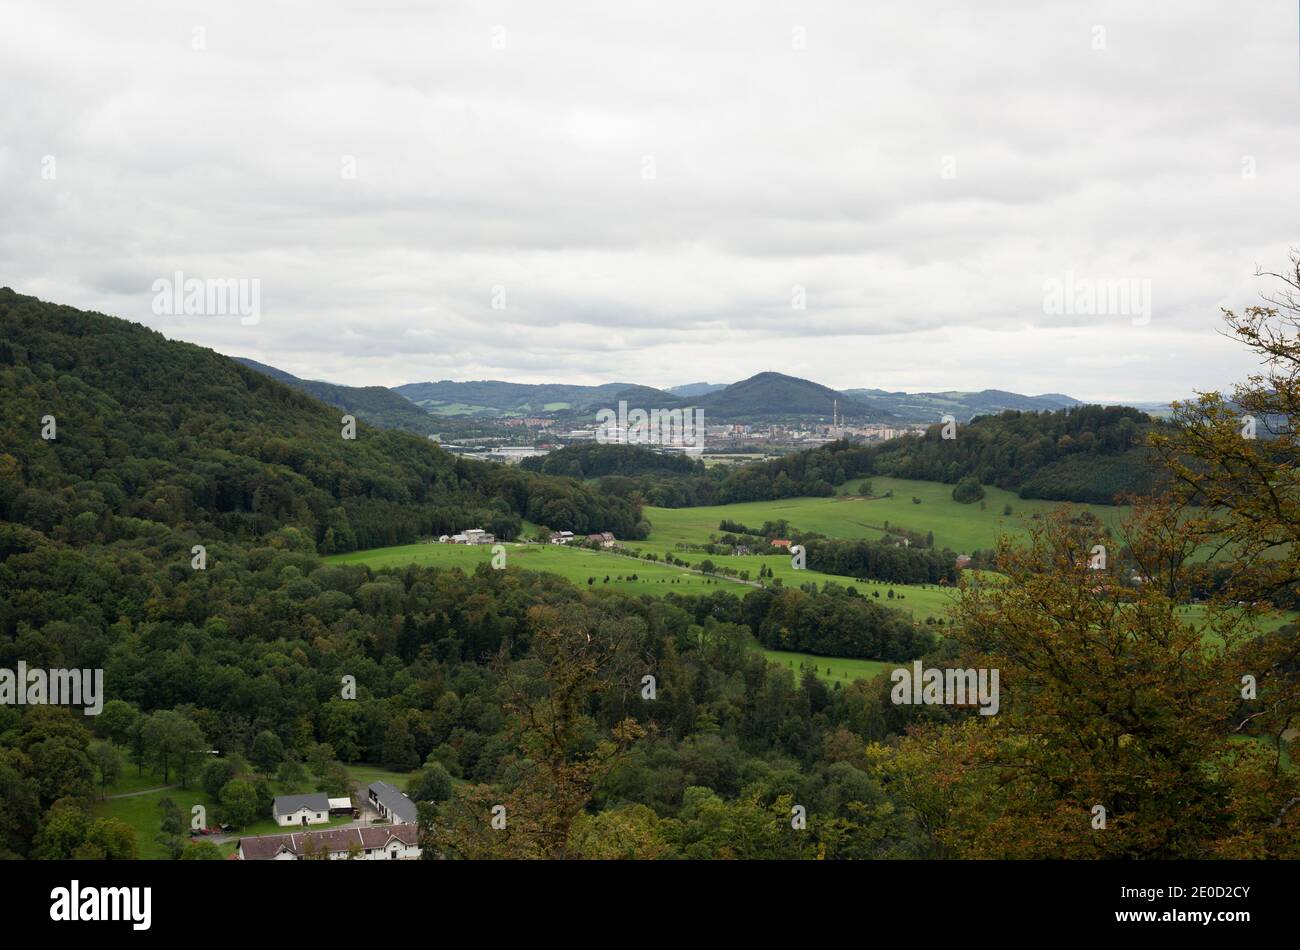 Beskid mountains and Koprivncie town in the valley. Landscape with mountains, hills, meadow, field and town. Cloudy and overcast weather. Stock Photo